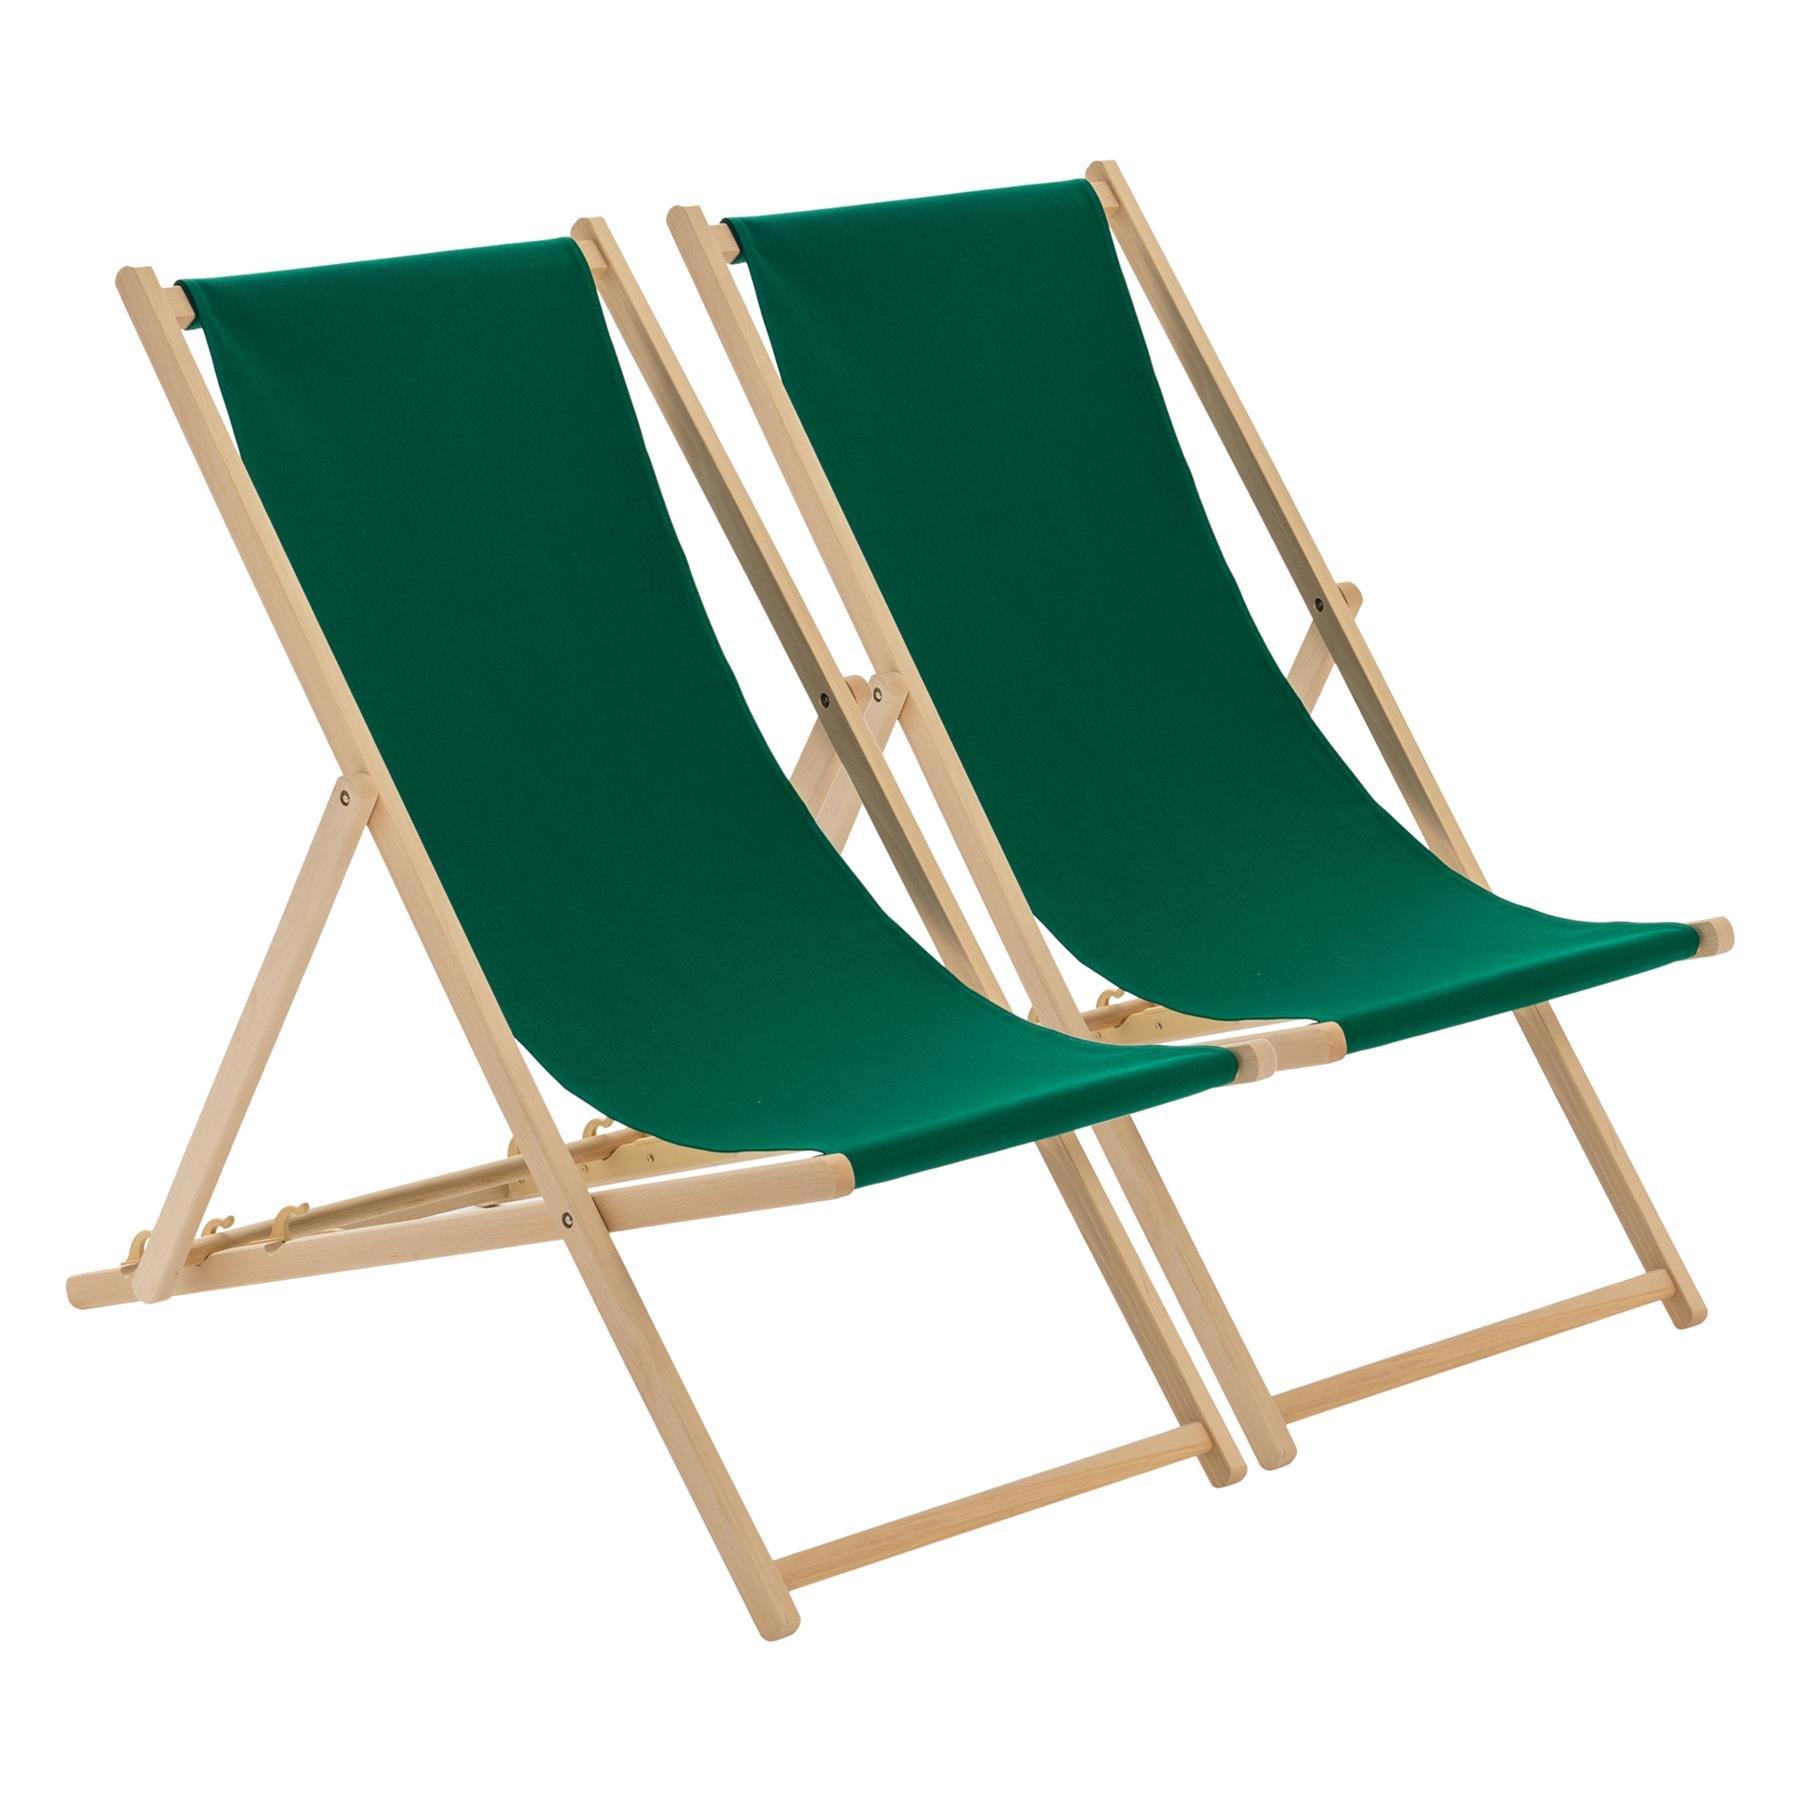 Folding Wooden Deck Chairs Green Pack of 2